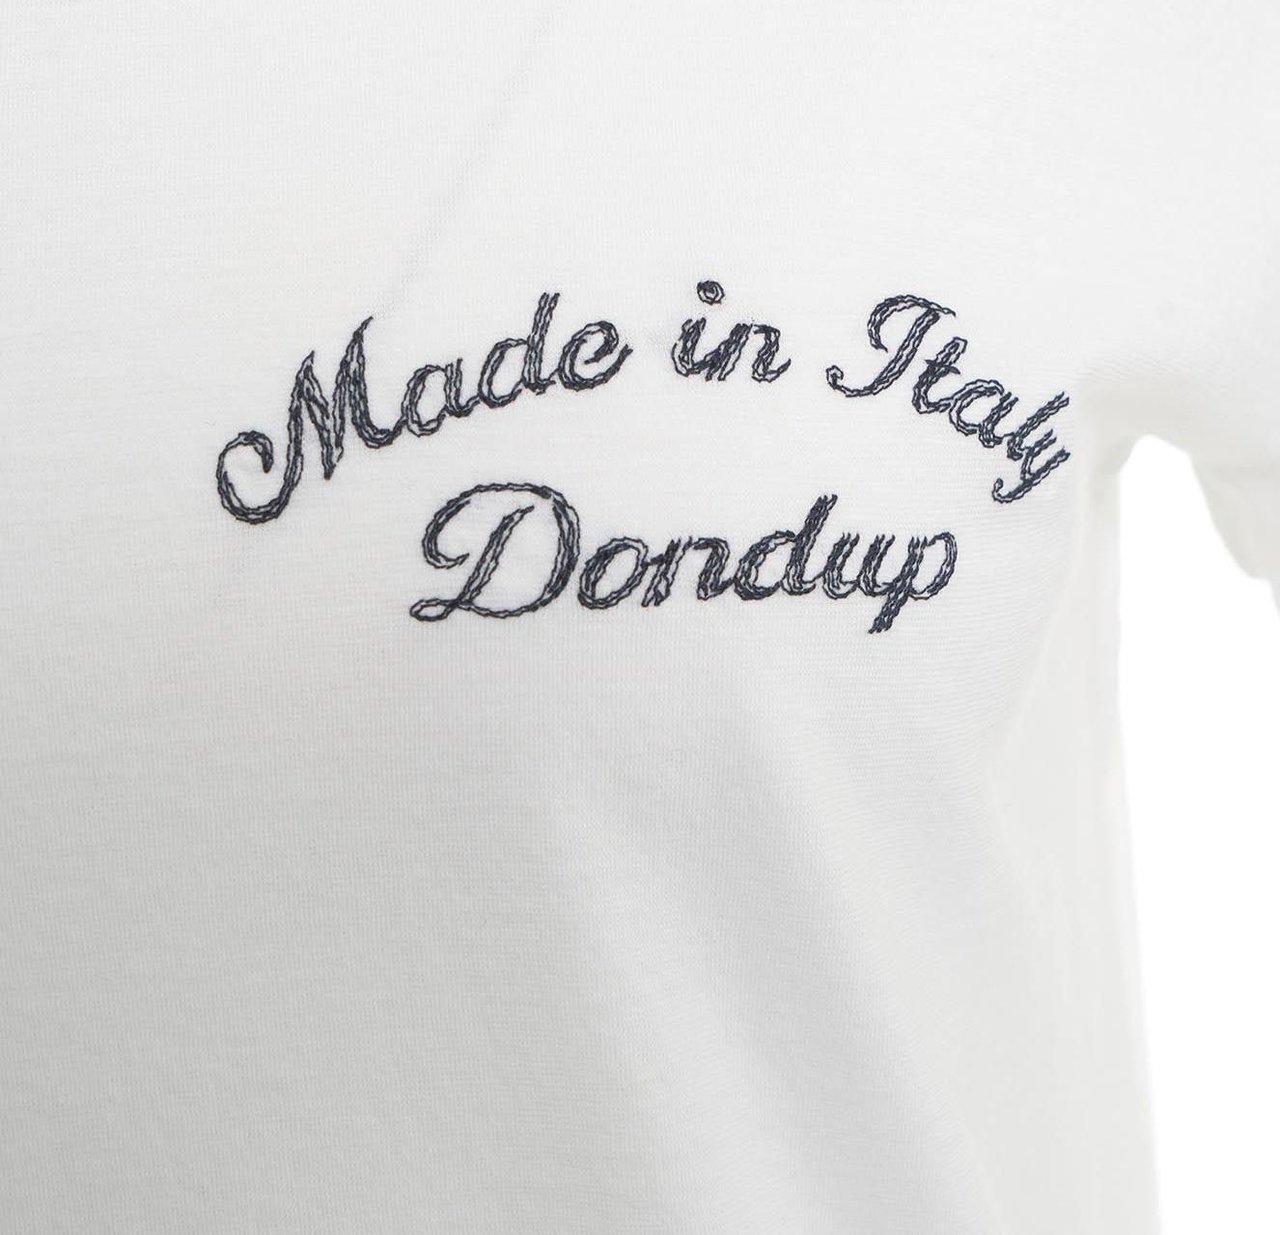 Dondup T-shirt with logo Wit